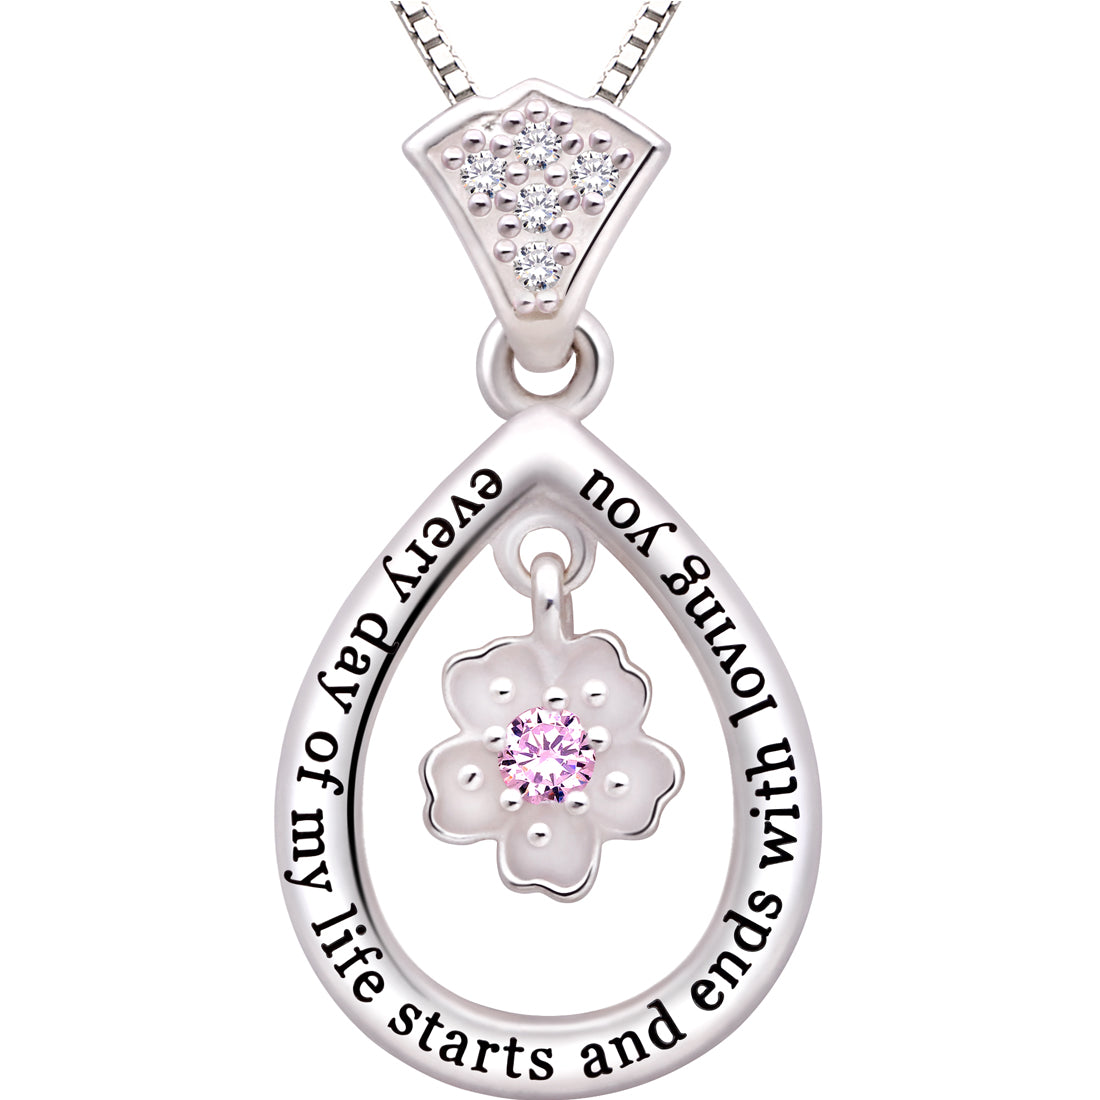 ALOV Jewelry Sterling Silver "every day of my life starts and ends with loving you" Love Cubic Zirconia Pendant Necklace